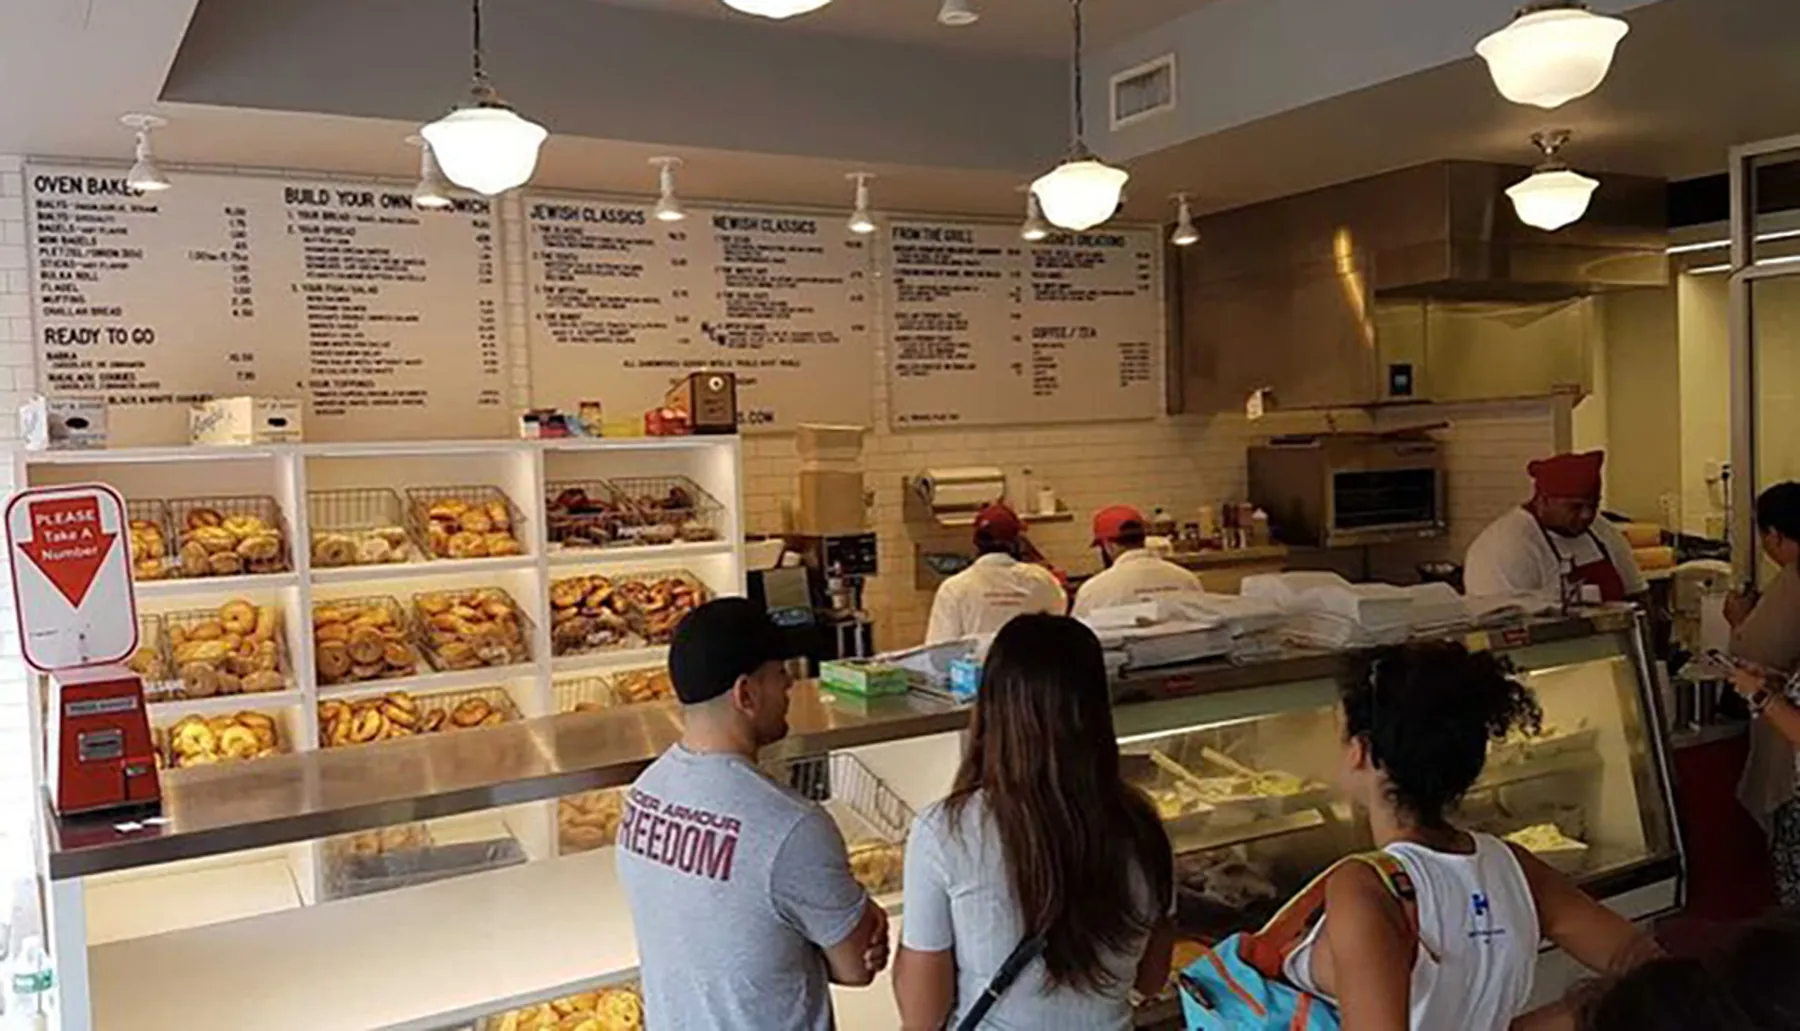 Customers are waiting in line at a deli counter with an array of baked goods on display and a menu board listing various sandwiches and dishes above.